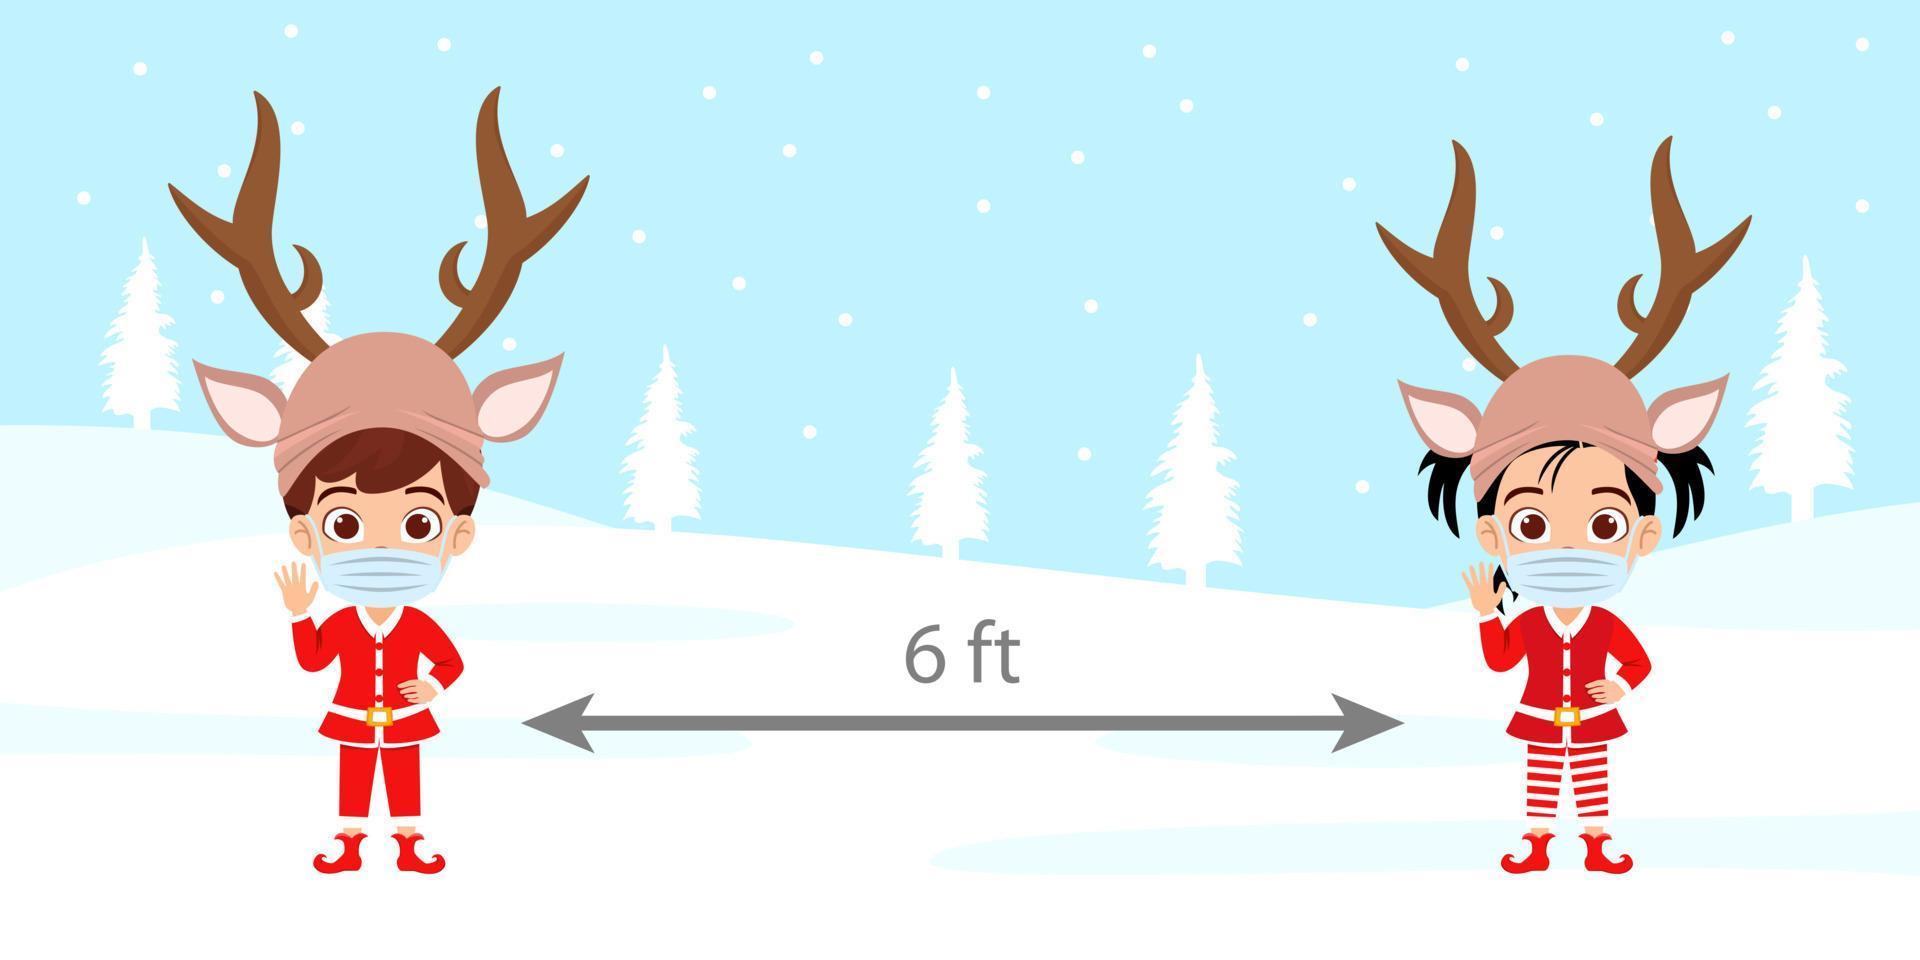 Cute beautiful kid boy and girl character standing on snow field snow falling wearing Christmas outfit and facial mask and reindeer hat keeping 6ft social distance vector